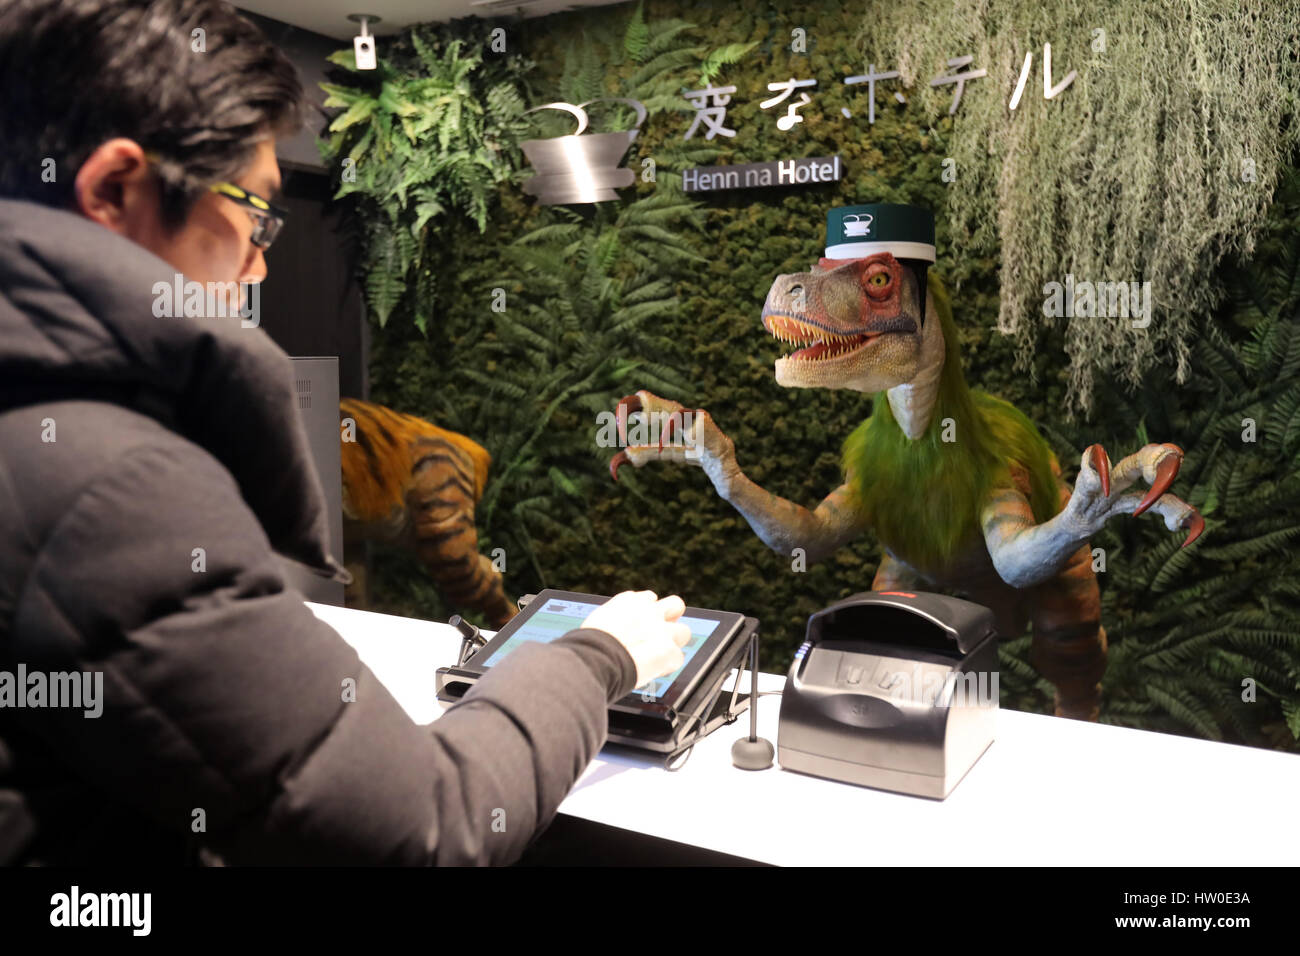 Tokyo, Japan. 15th March 2017. Urayasu, Japan. 15th Mar, 2017. A dinosaur robot greets a guest at a reception of the newly opened 'Henn na Hotel' (Strange hotel) near Tokyo Disney Resort in Urayasu, suburban Tokyo on Wednesday, March 15, 2017. Japan's travel agency H.I.S runs the Henn na Hotel which has only seven human employees while nine types 140 robot staffs work at the 100-room six-storey hotel. Credit: Aflo Co. Ltd./Alamy Live News Stock Photo